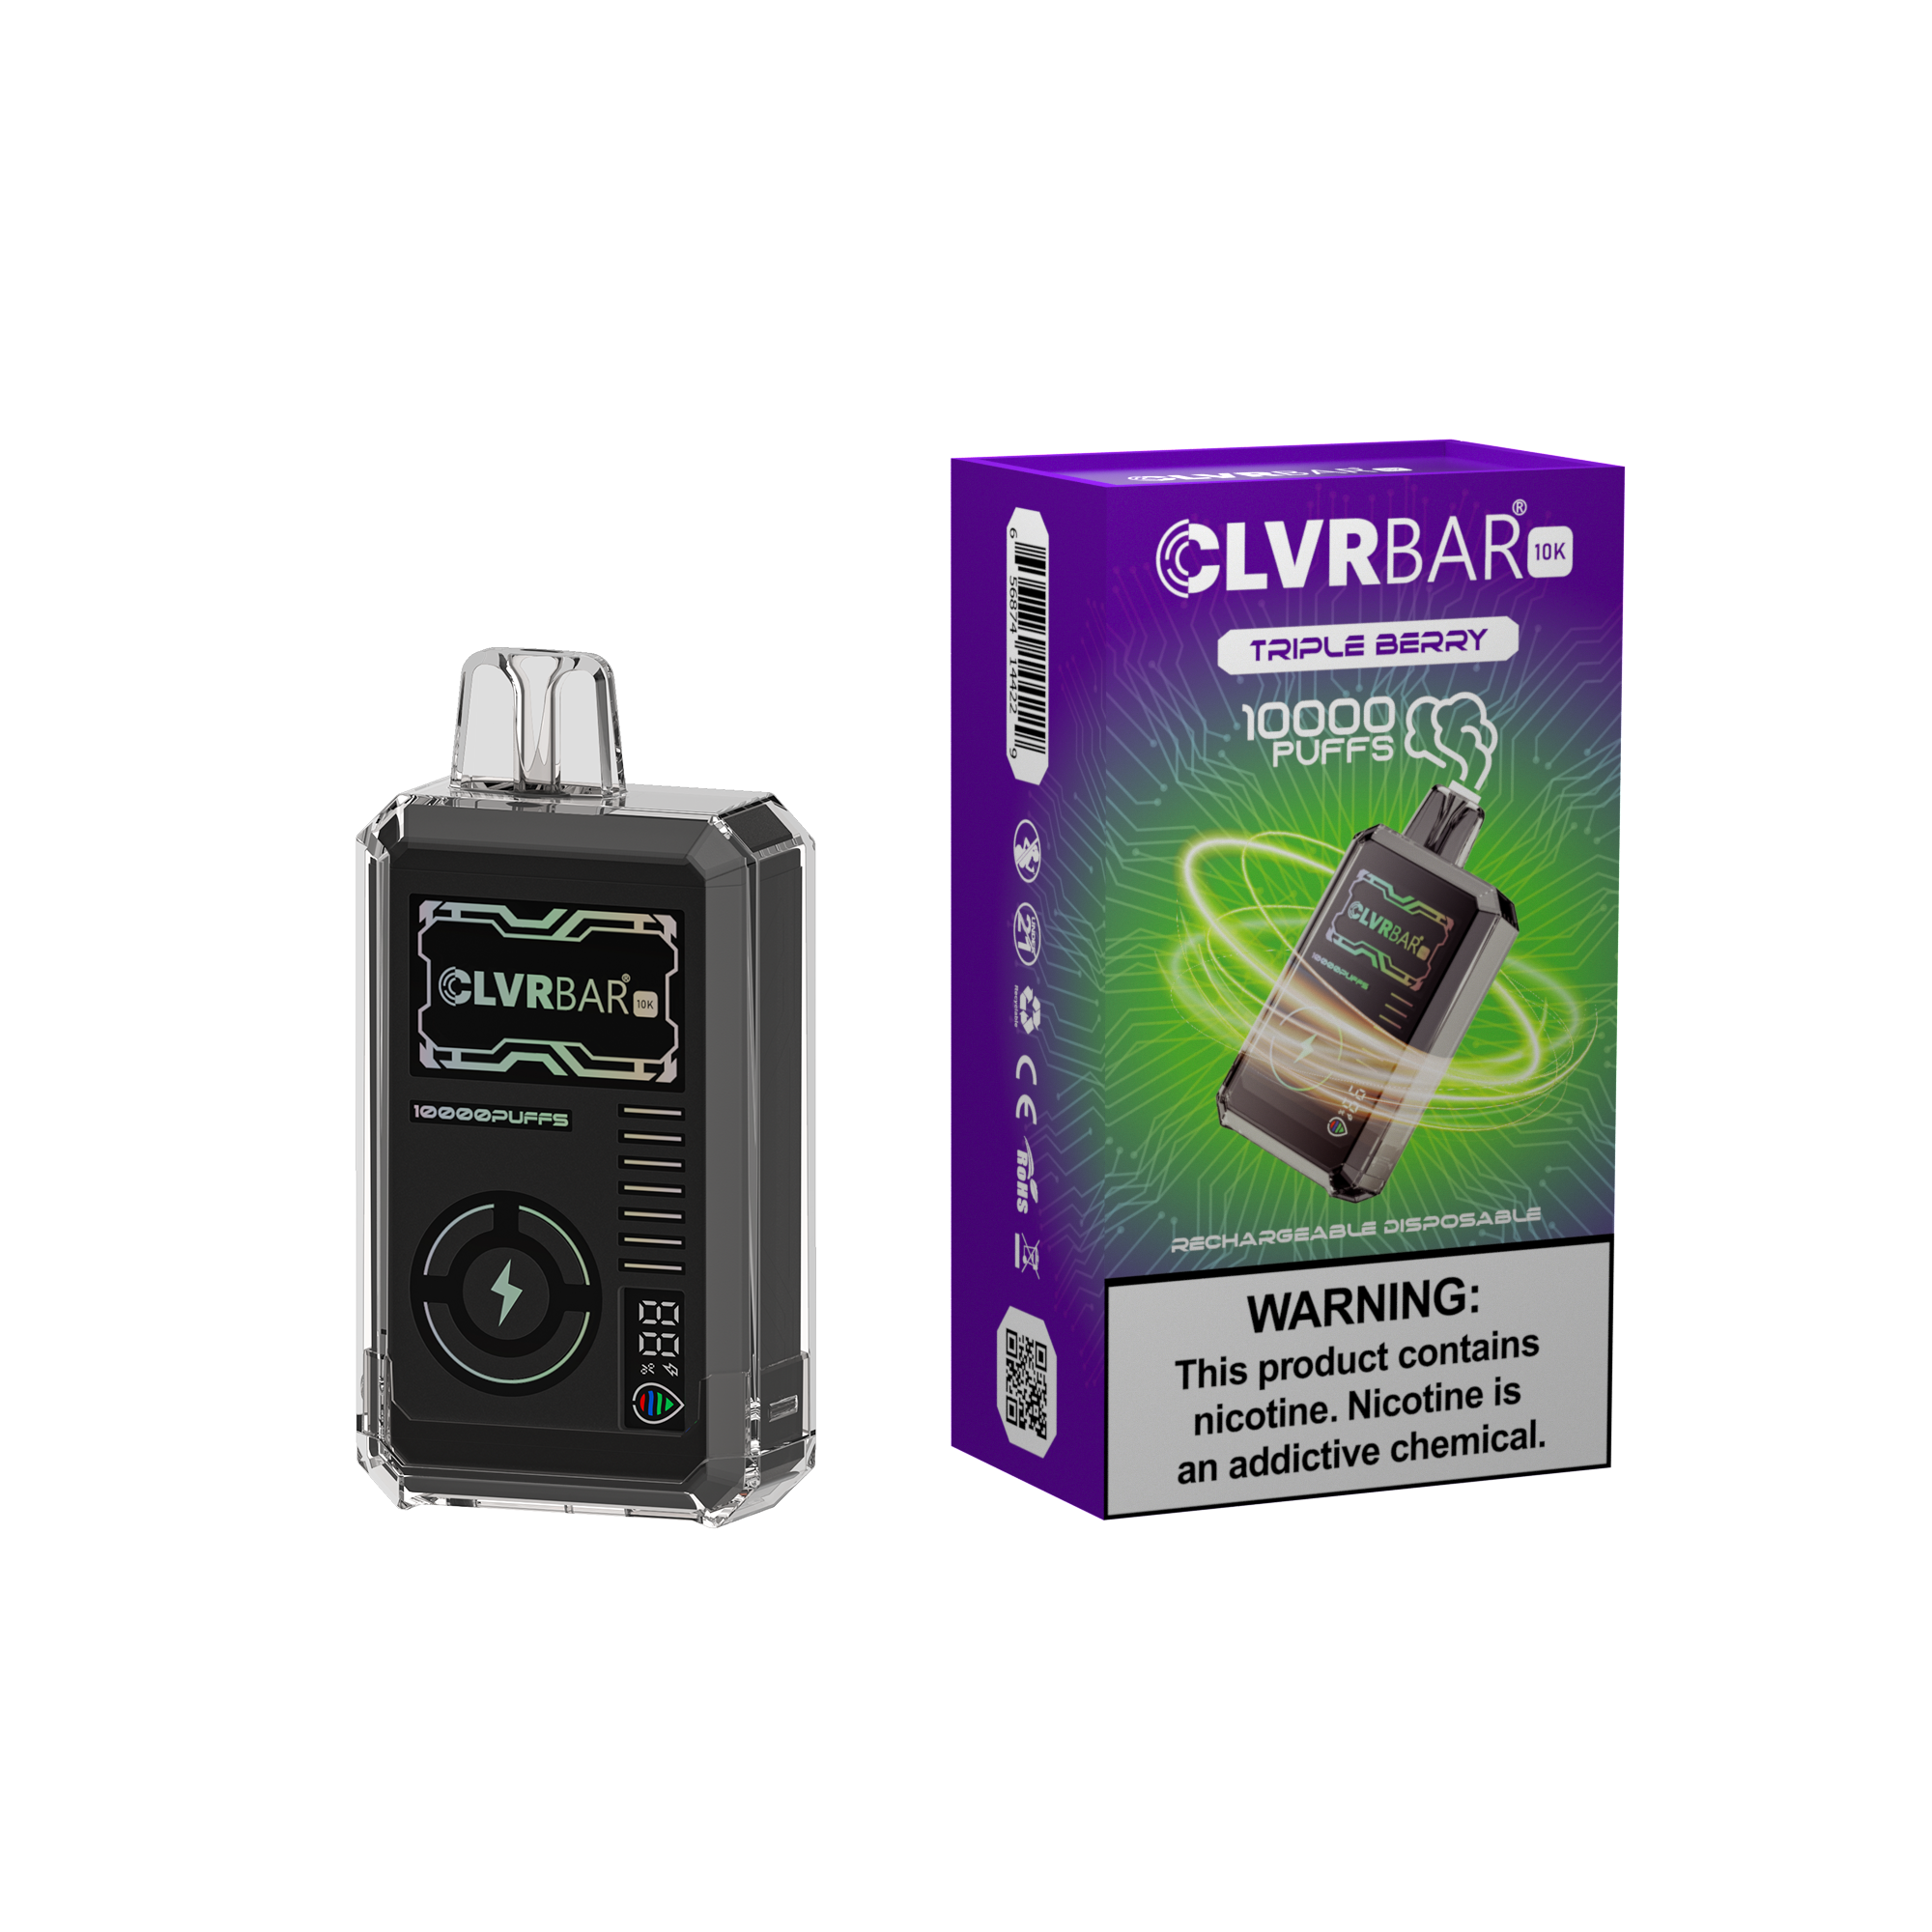 CLVRBAR disposable device 10000 Puffs- Triple Berry